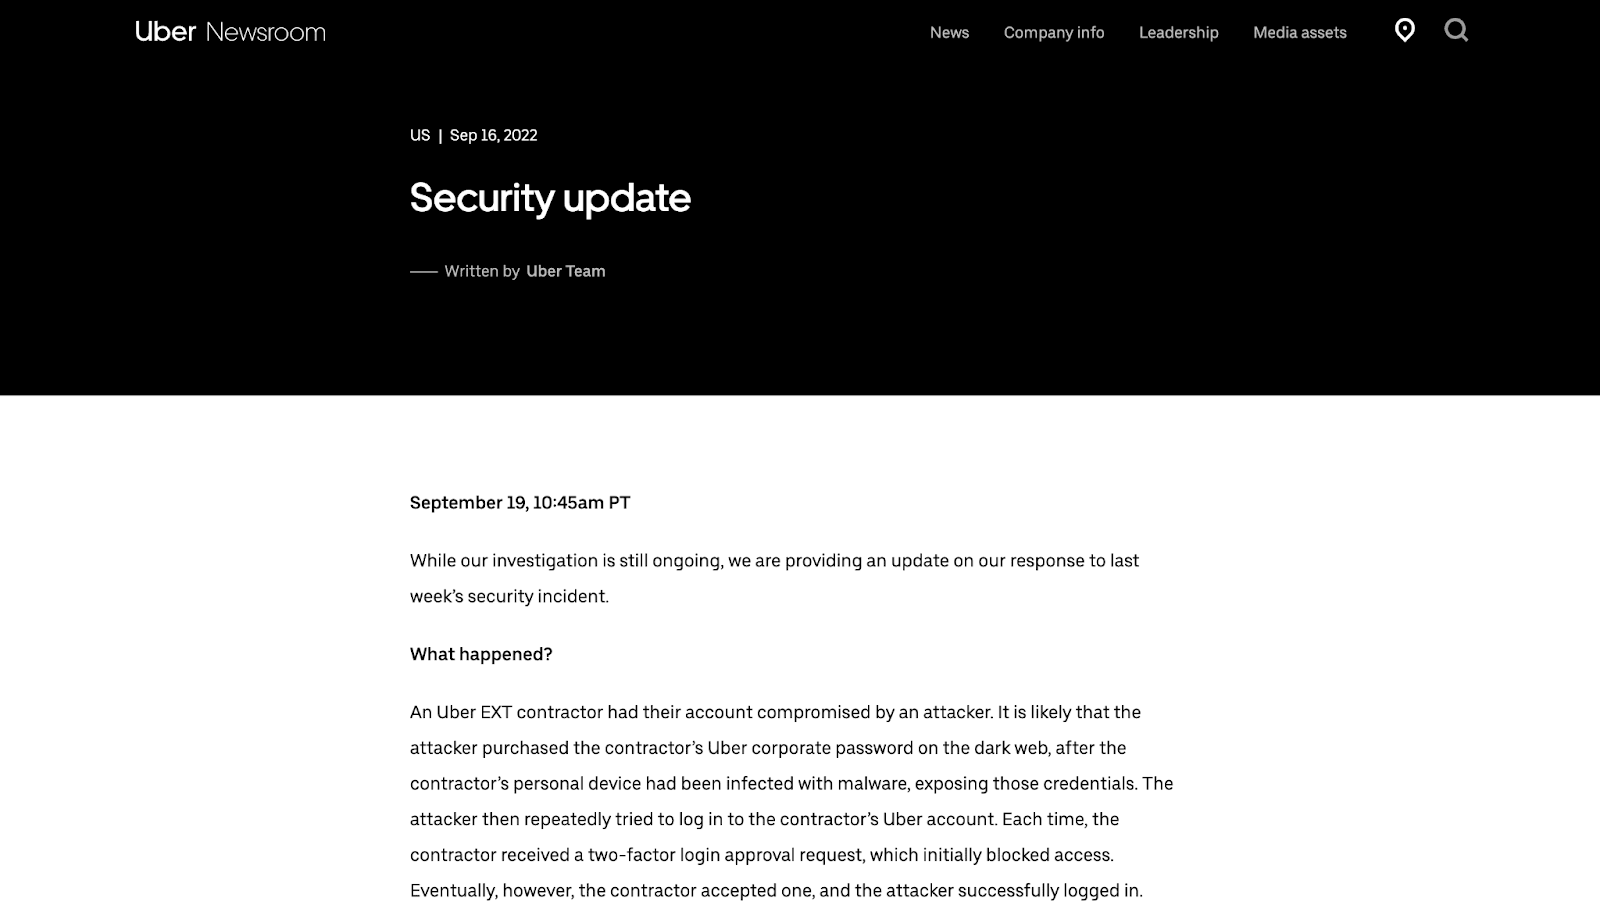 Uber's security update on their website following the data breach